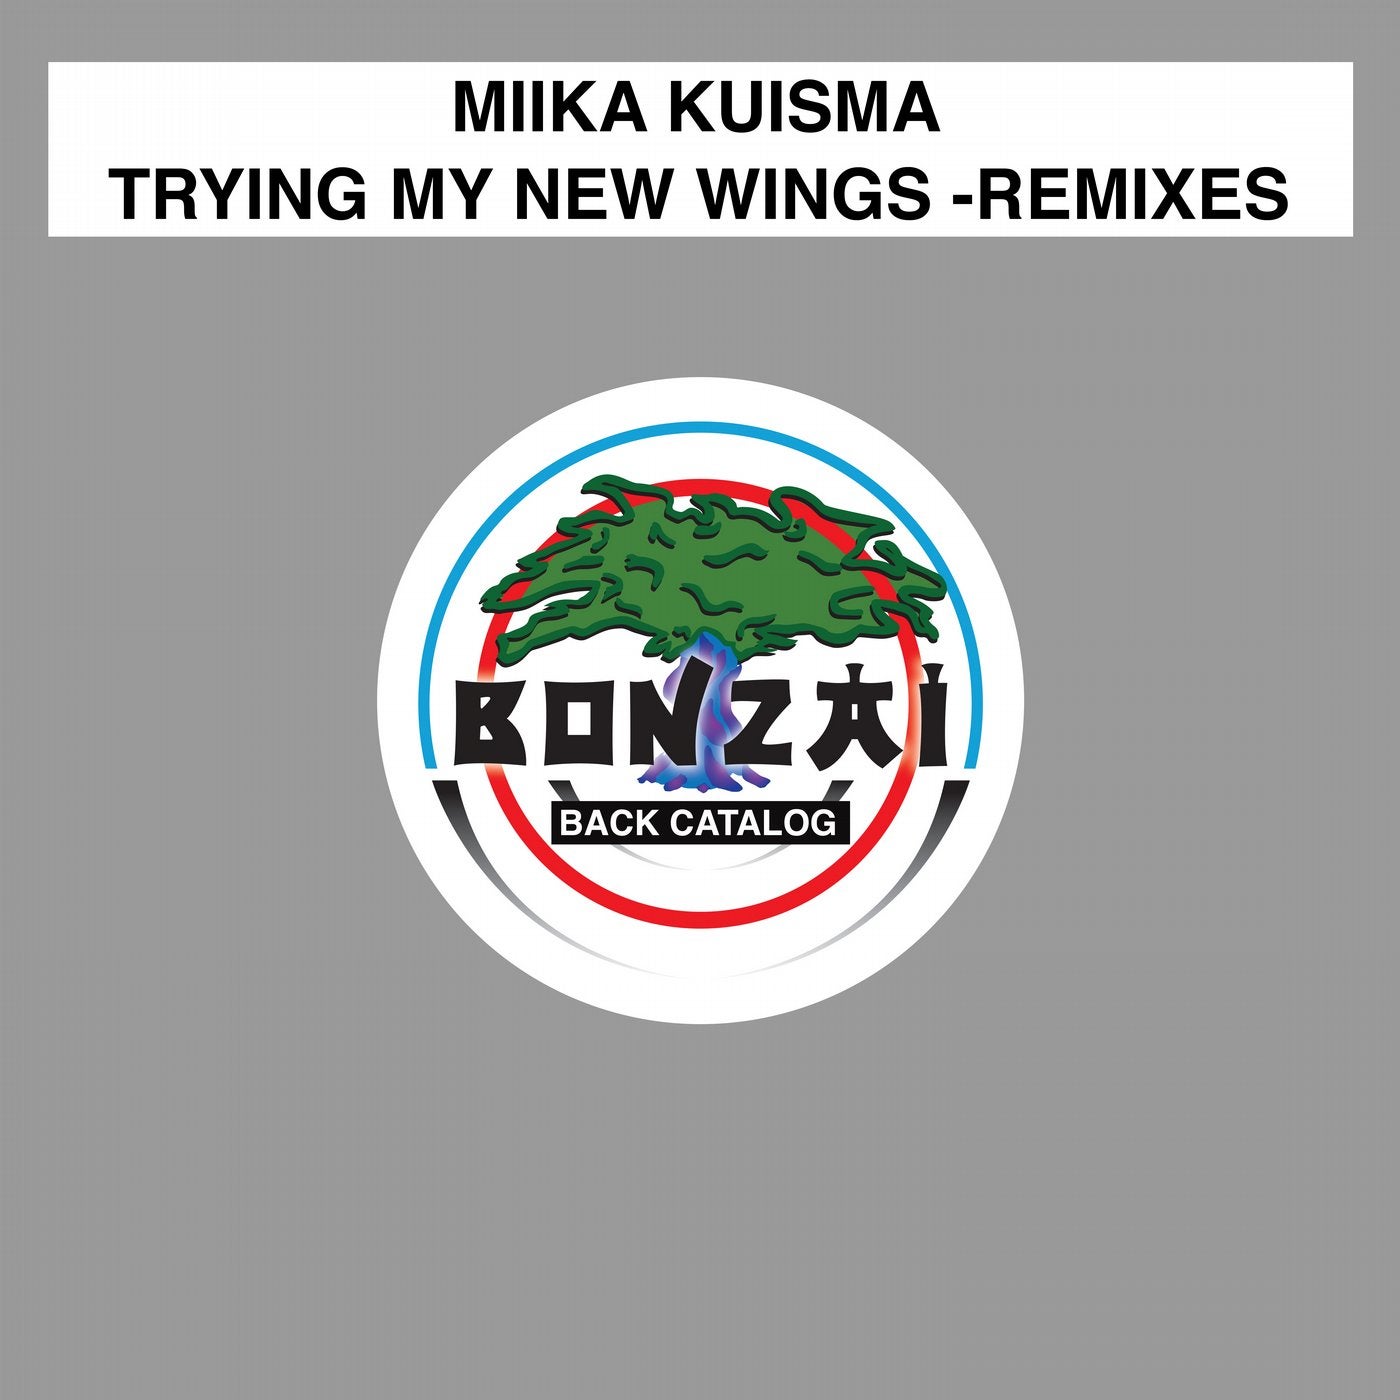 Trying My New Wings - Remixes